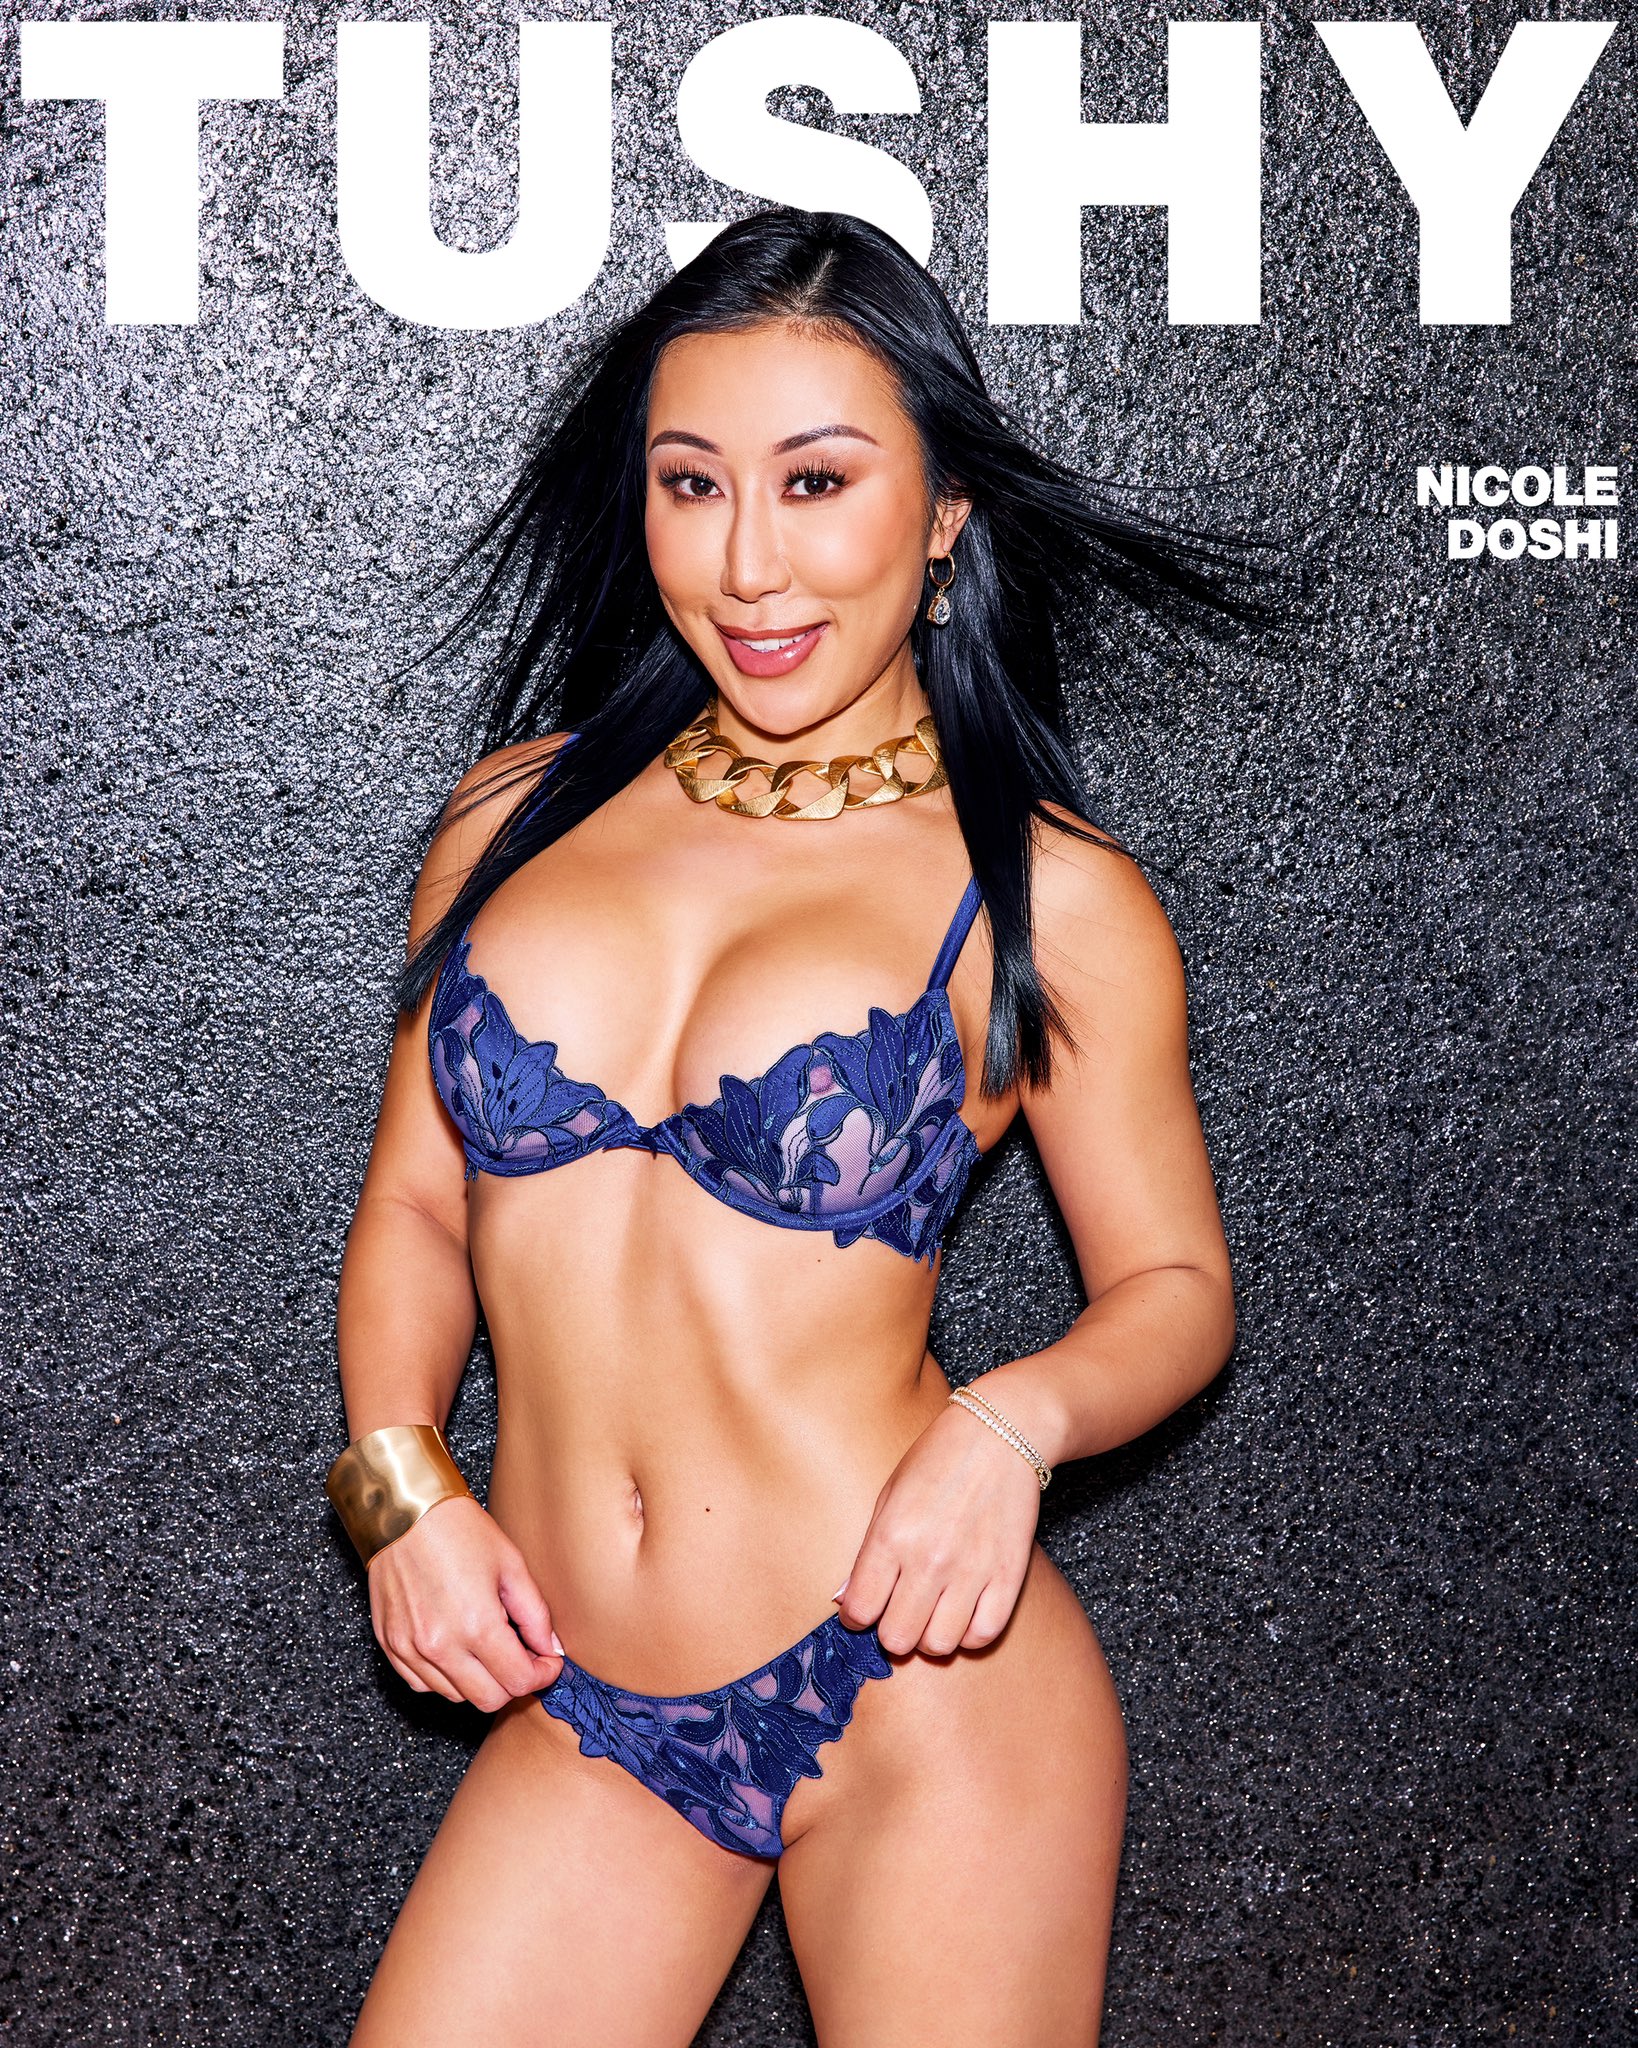 Nicole Doshi on X: ✨Check out my newest release with @tushy_com  🍑😈🖤👇👇👇👇 t.coXt2EGenCKU If you purchase the full video on  t.coohEYo9pOH5 this Sunday, i will give you one month free  exclusive access